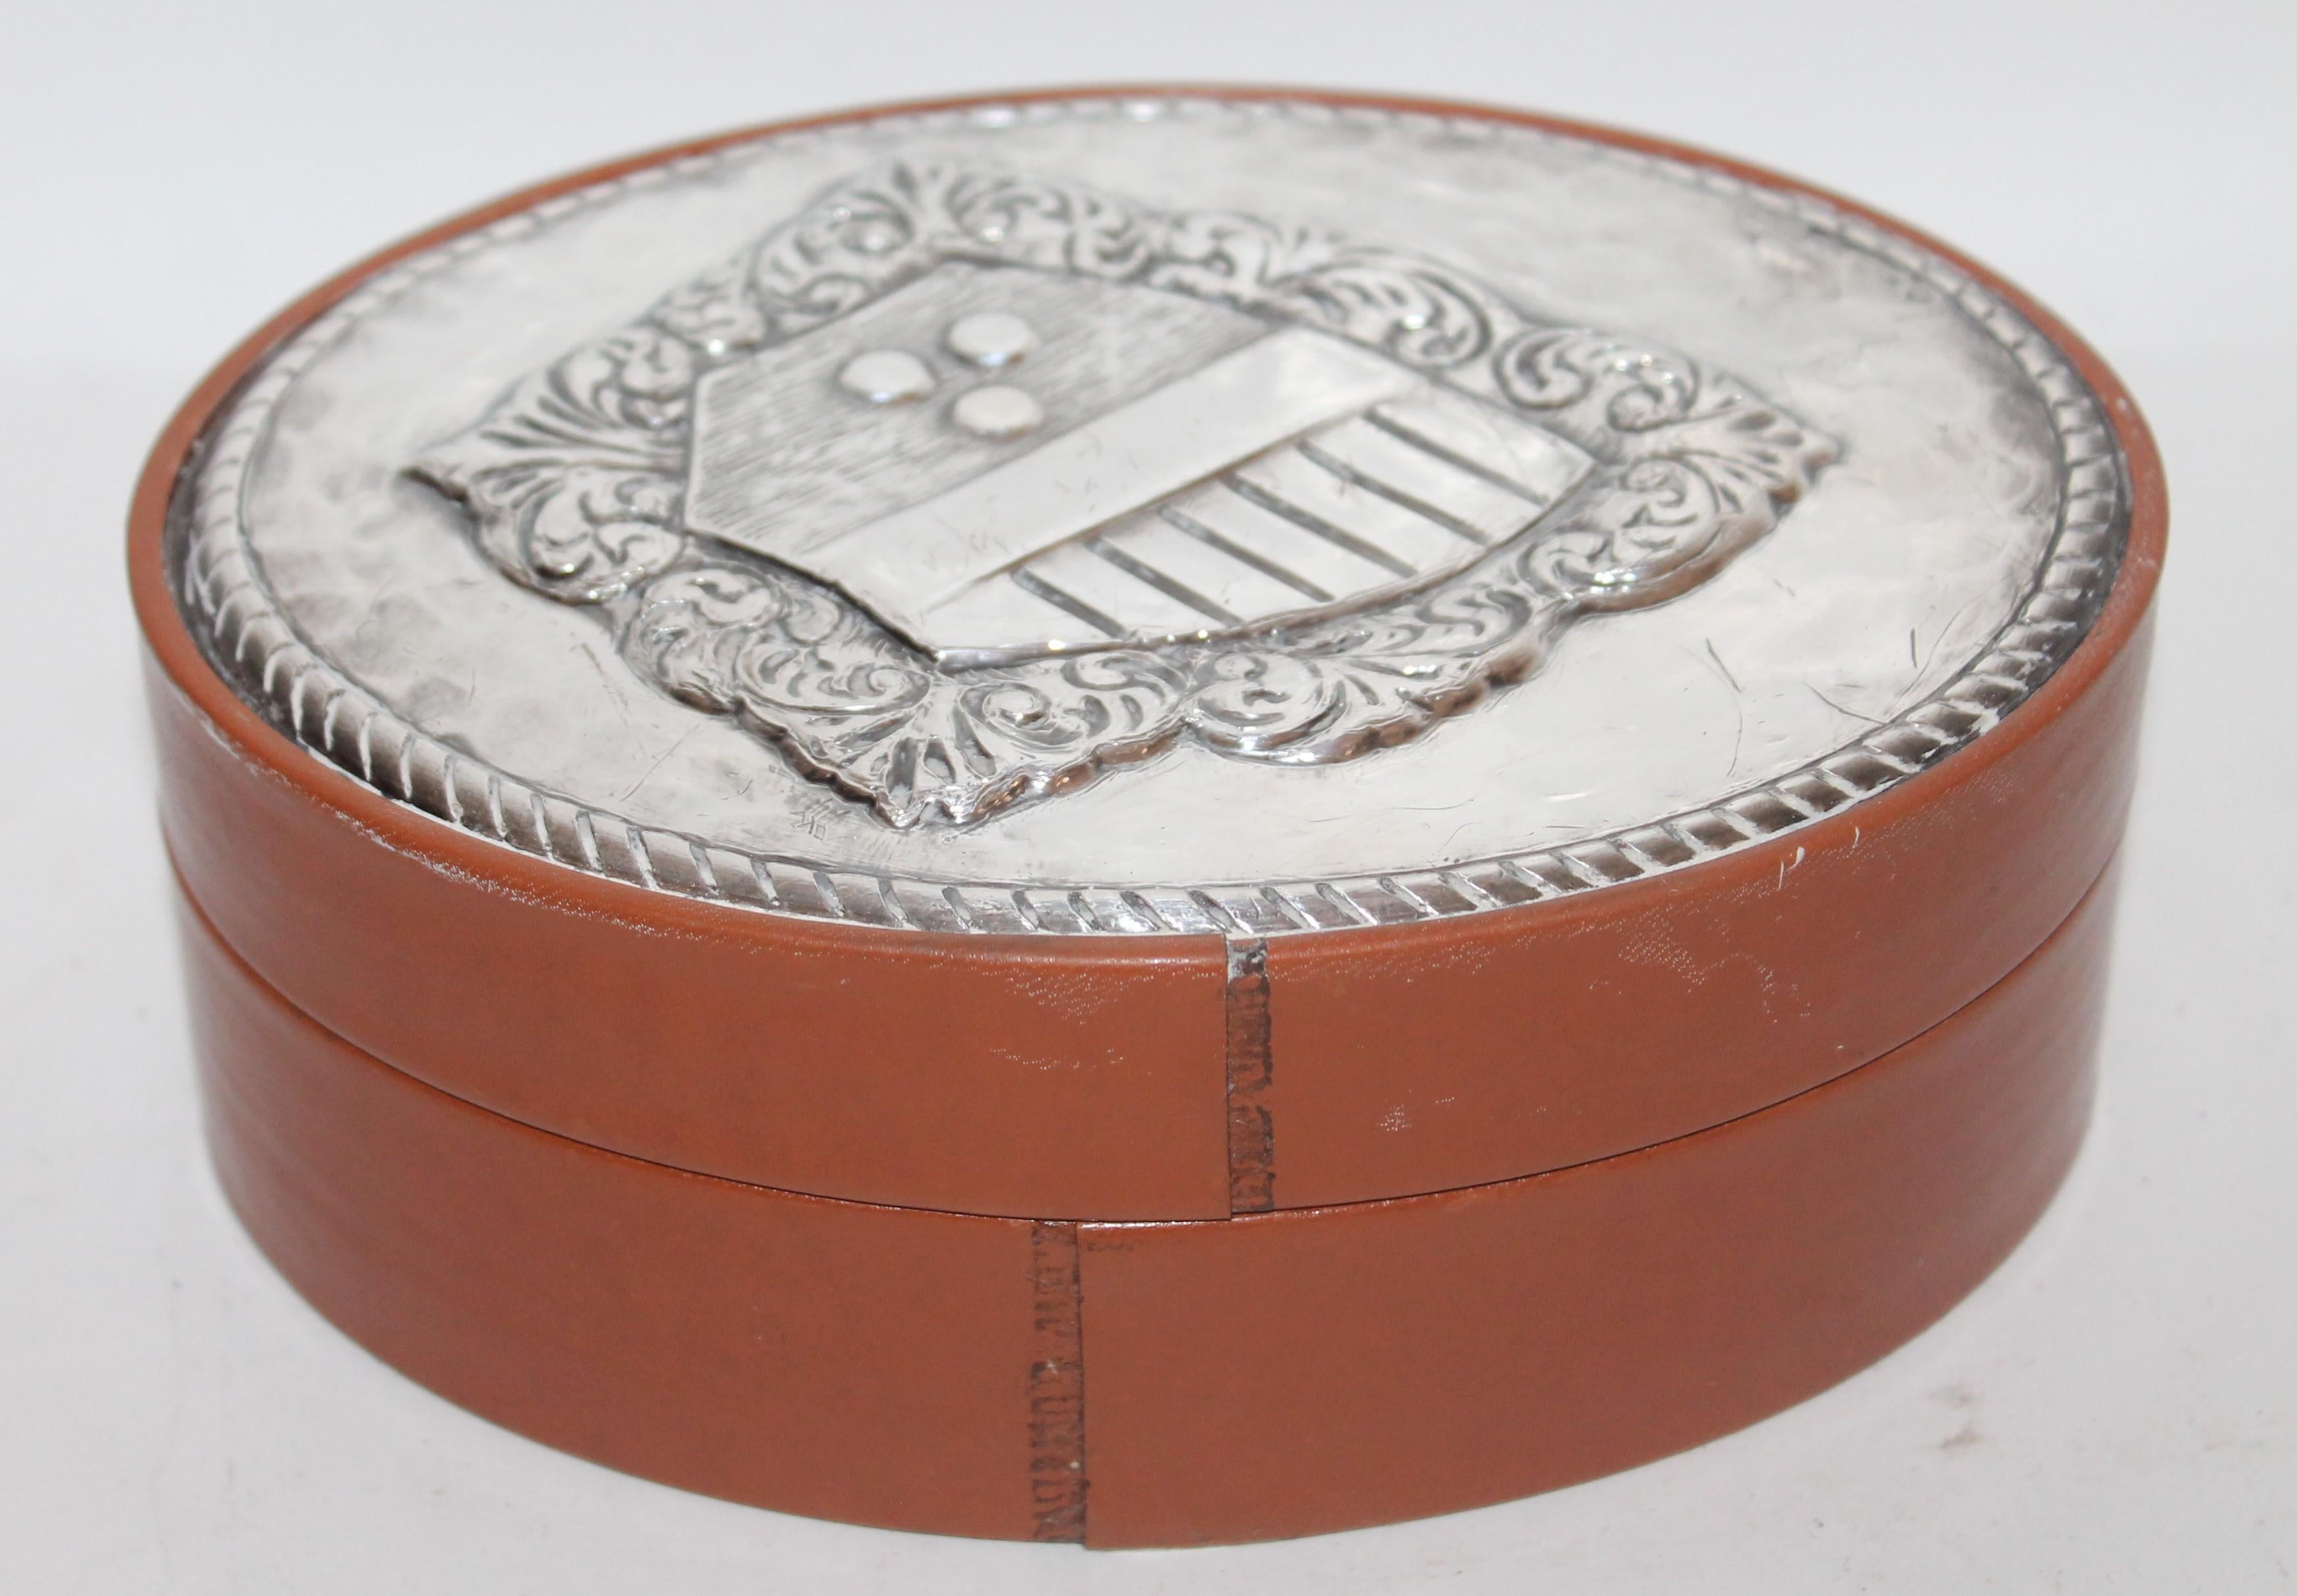 This fine sterling silver laid on leather handcrafted men's jewelry box. Perfect condition.